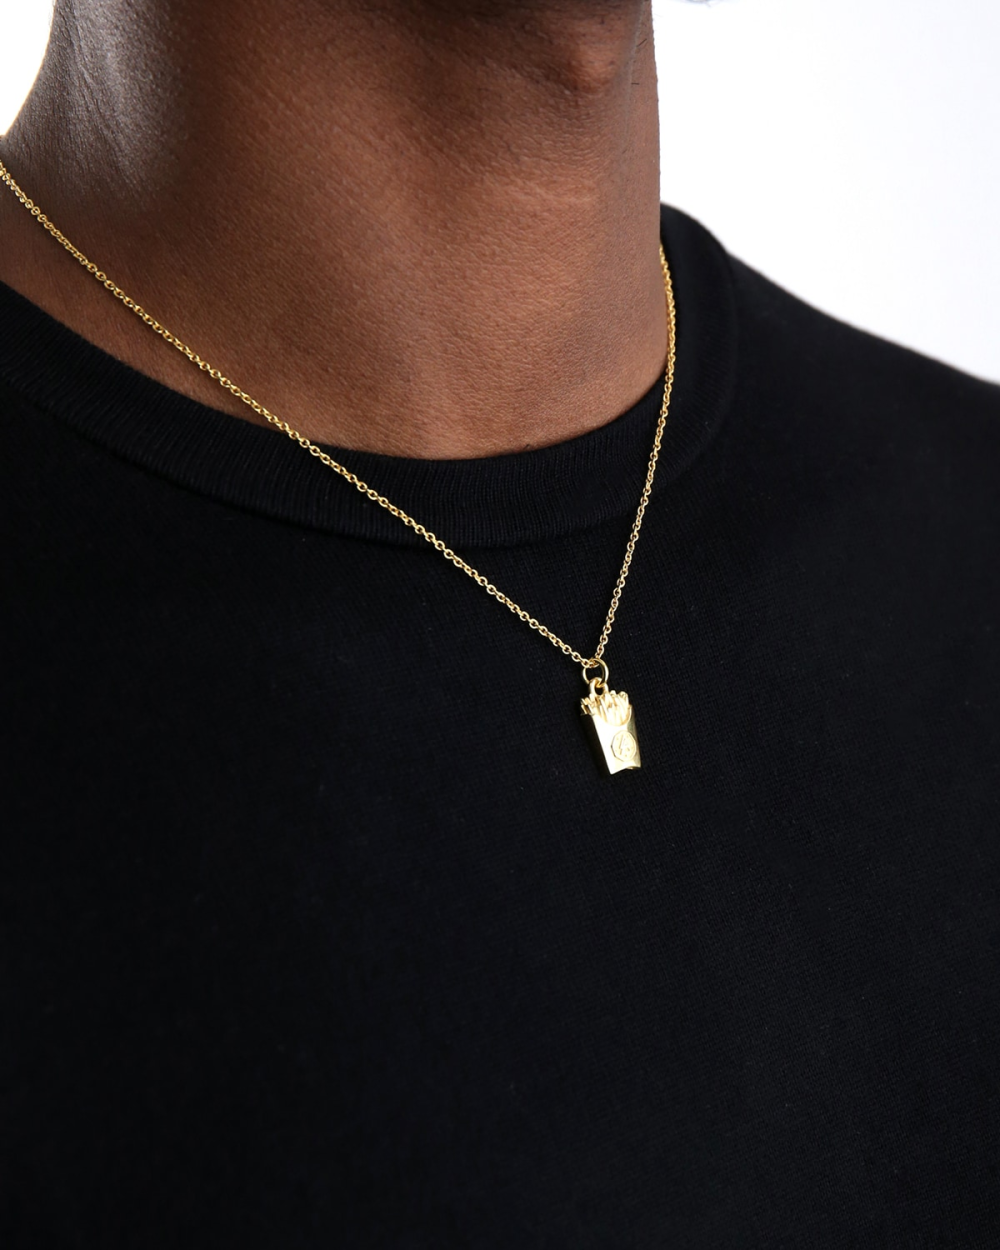 FAST FOOD CHIPS PENDANT